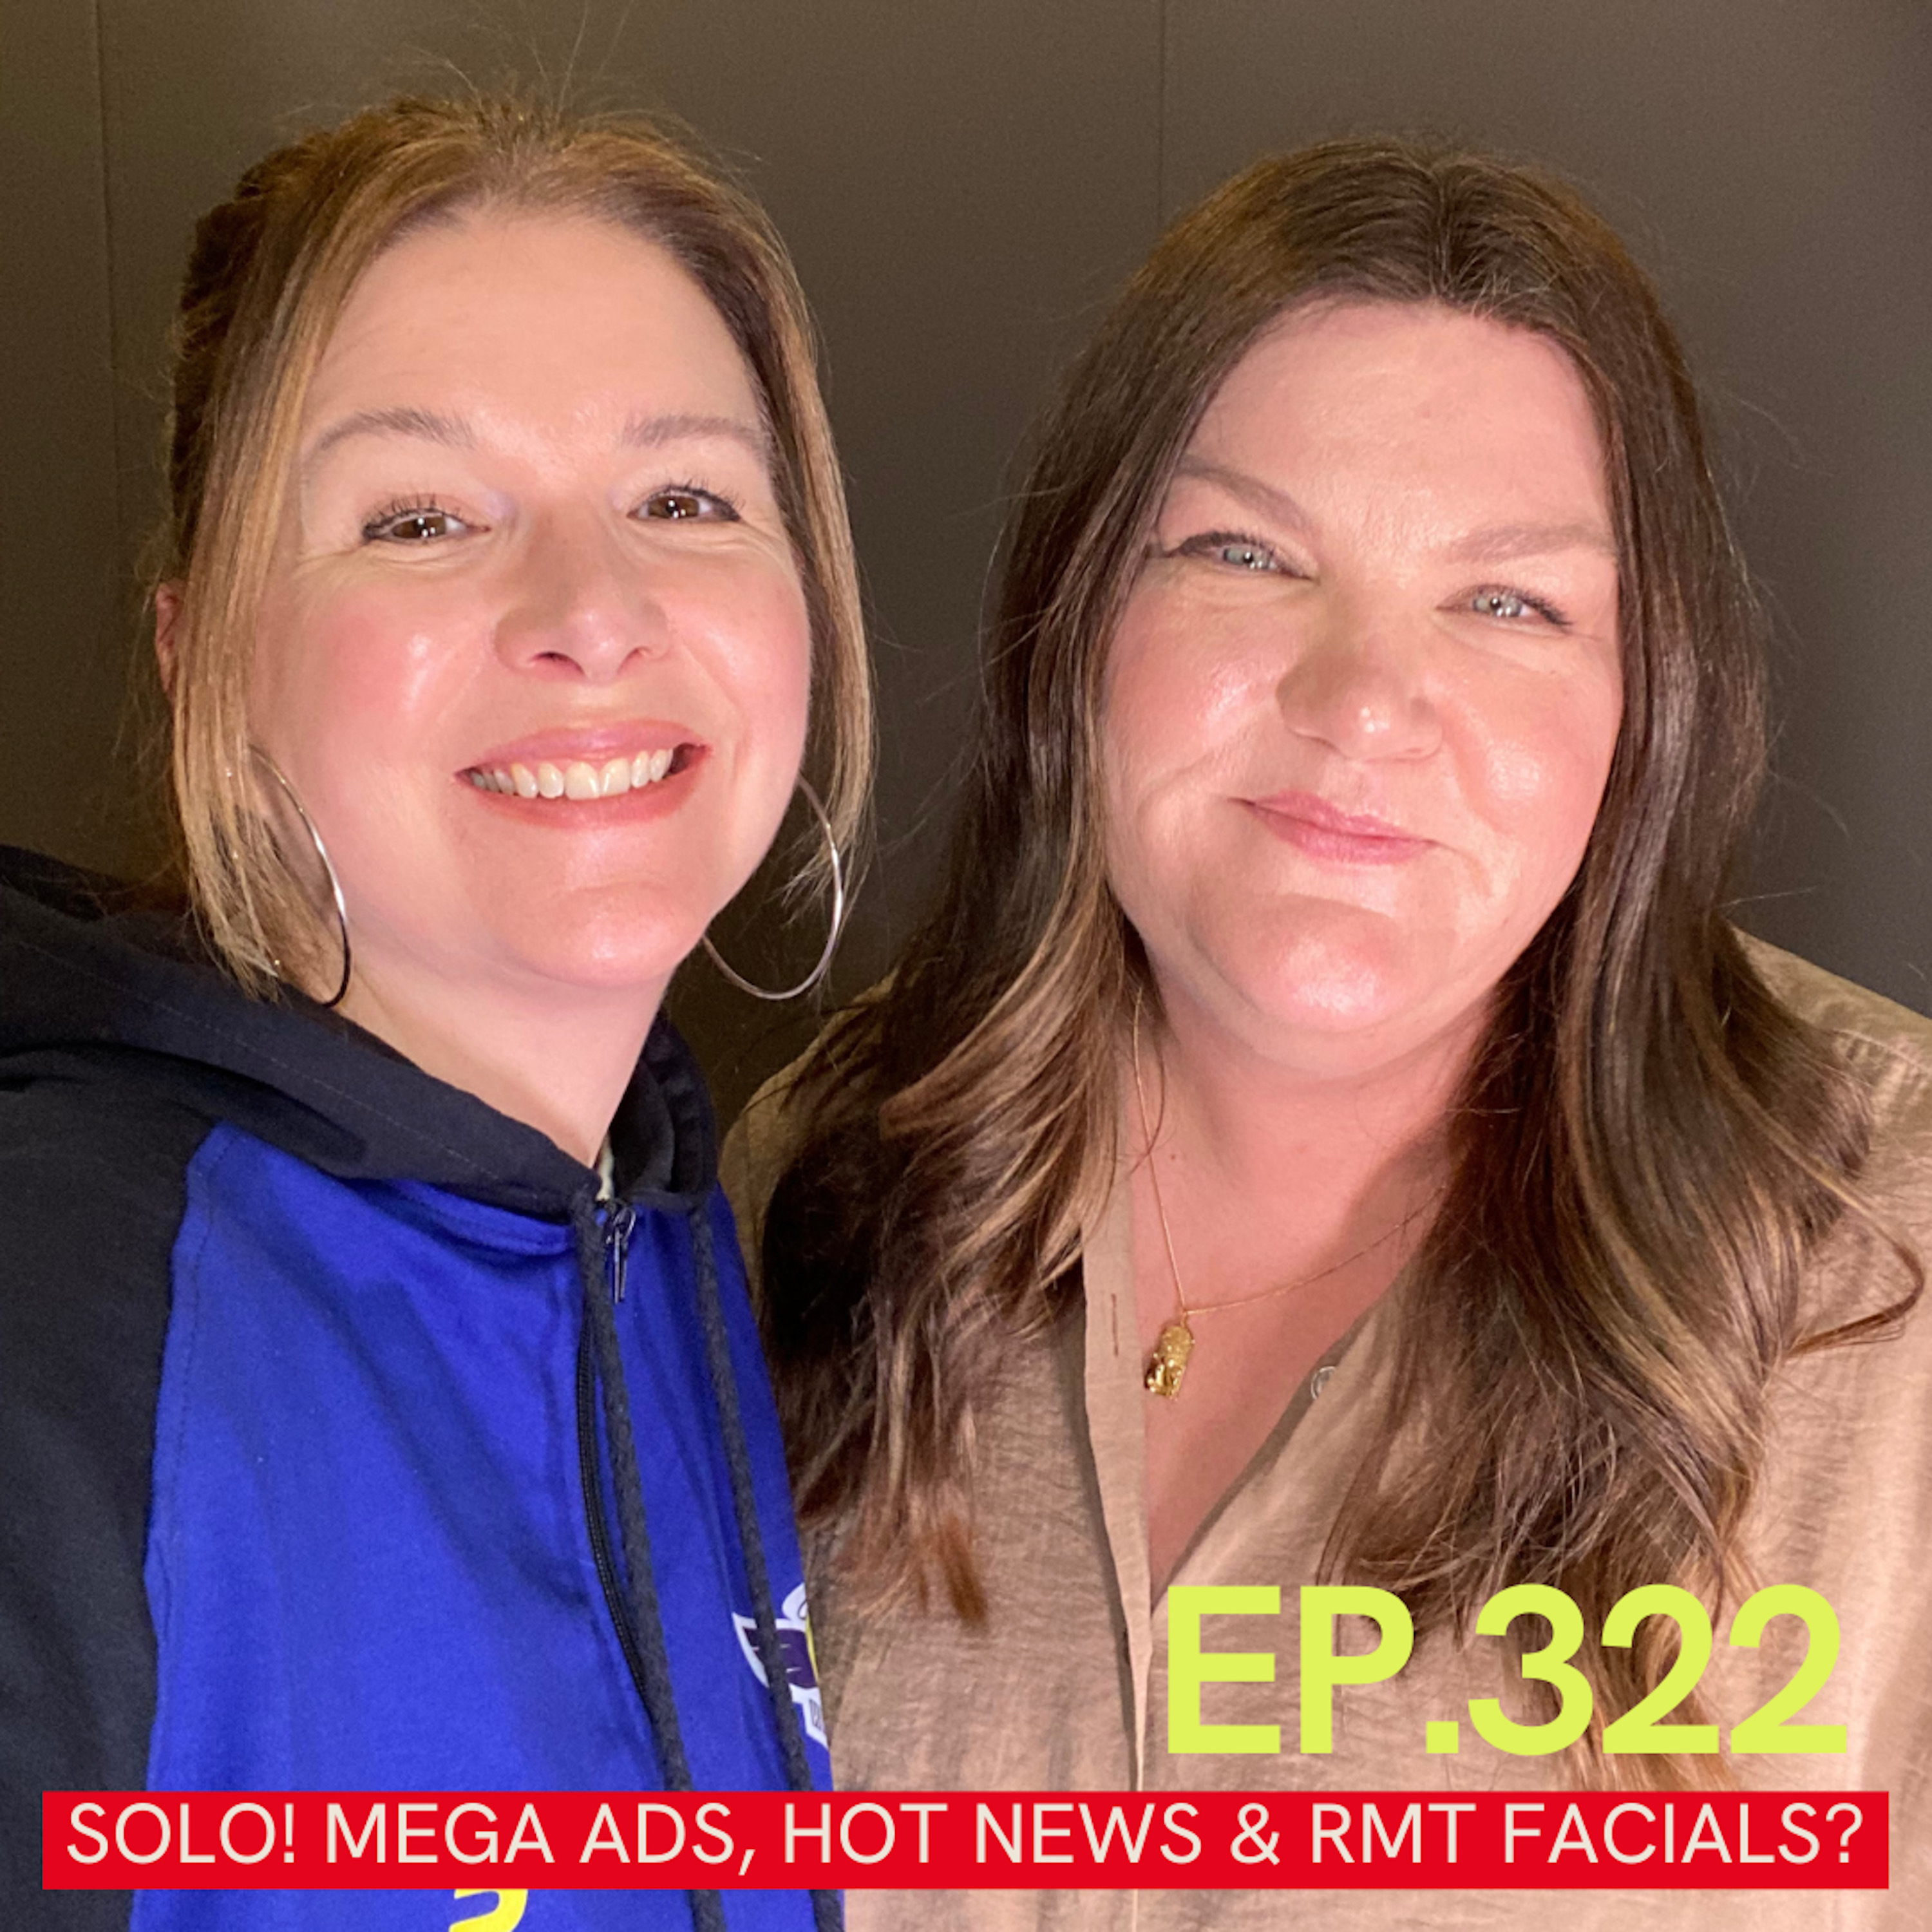 Solo Episode! The Viral Beauty Ads We Can’t Stop Talking About, Lipstick’s Big Renaissance and The (Controversial?) RMT Face Massage You’d Swear Was a Facial